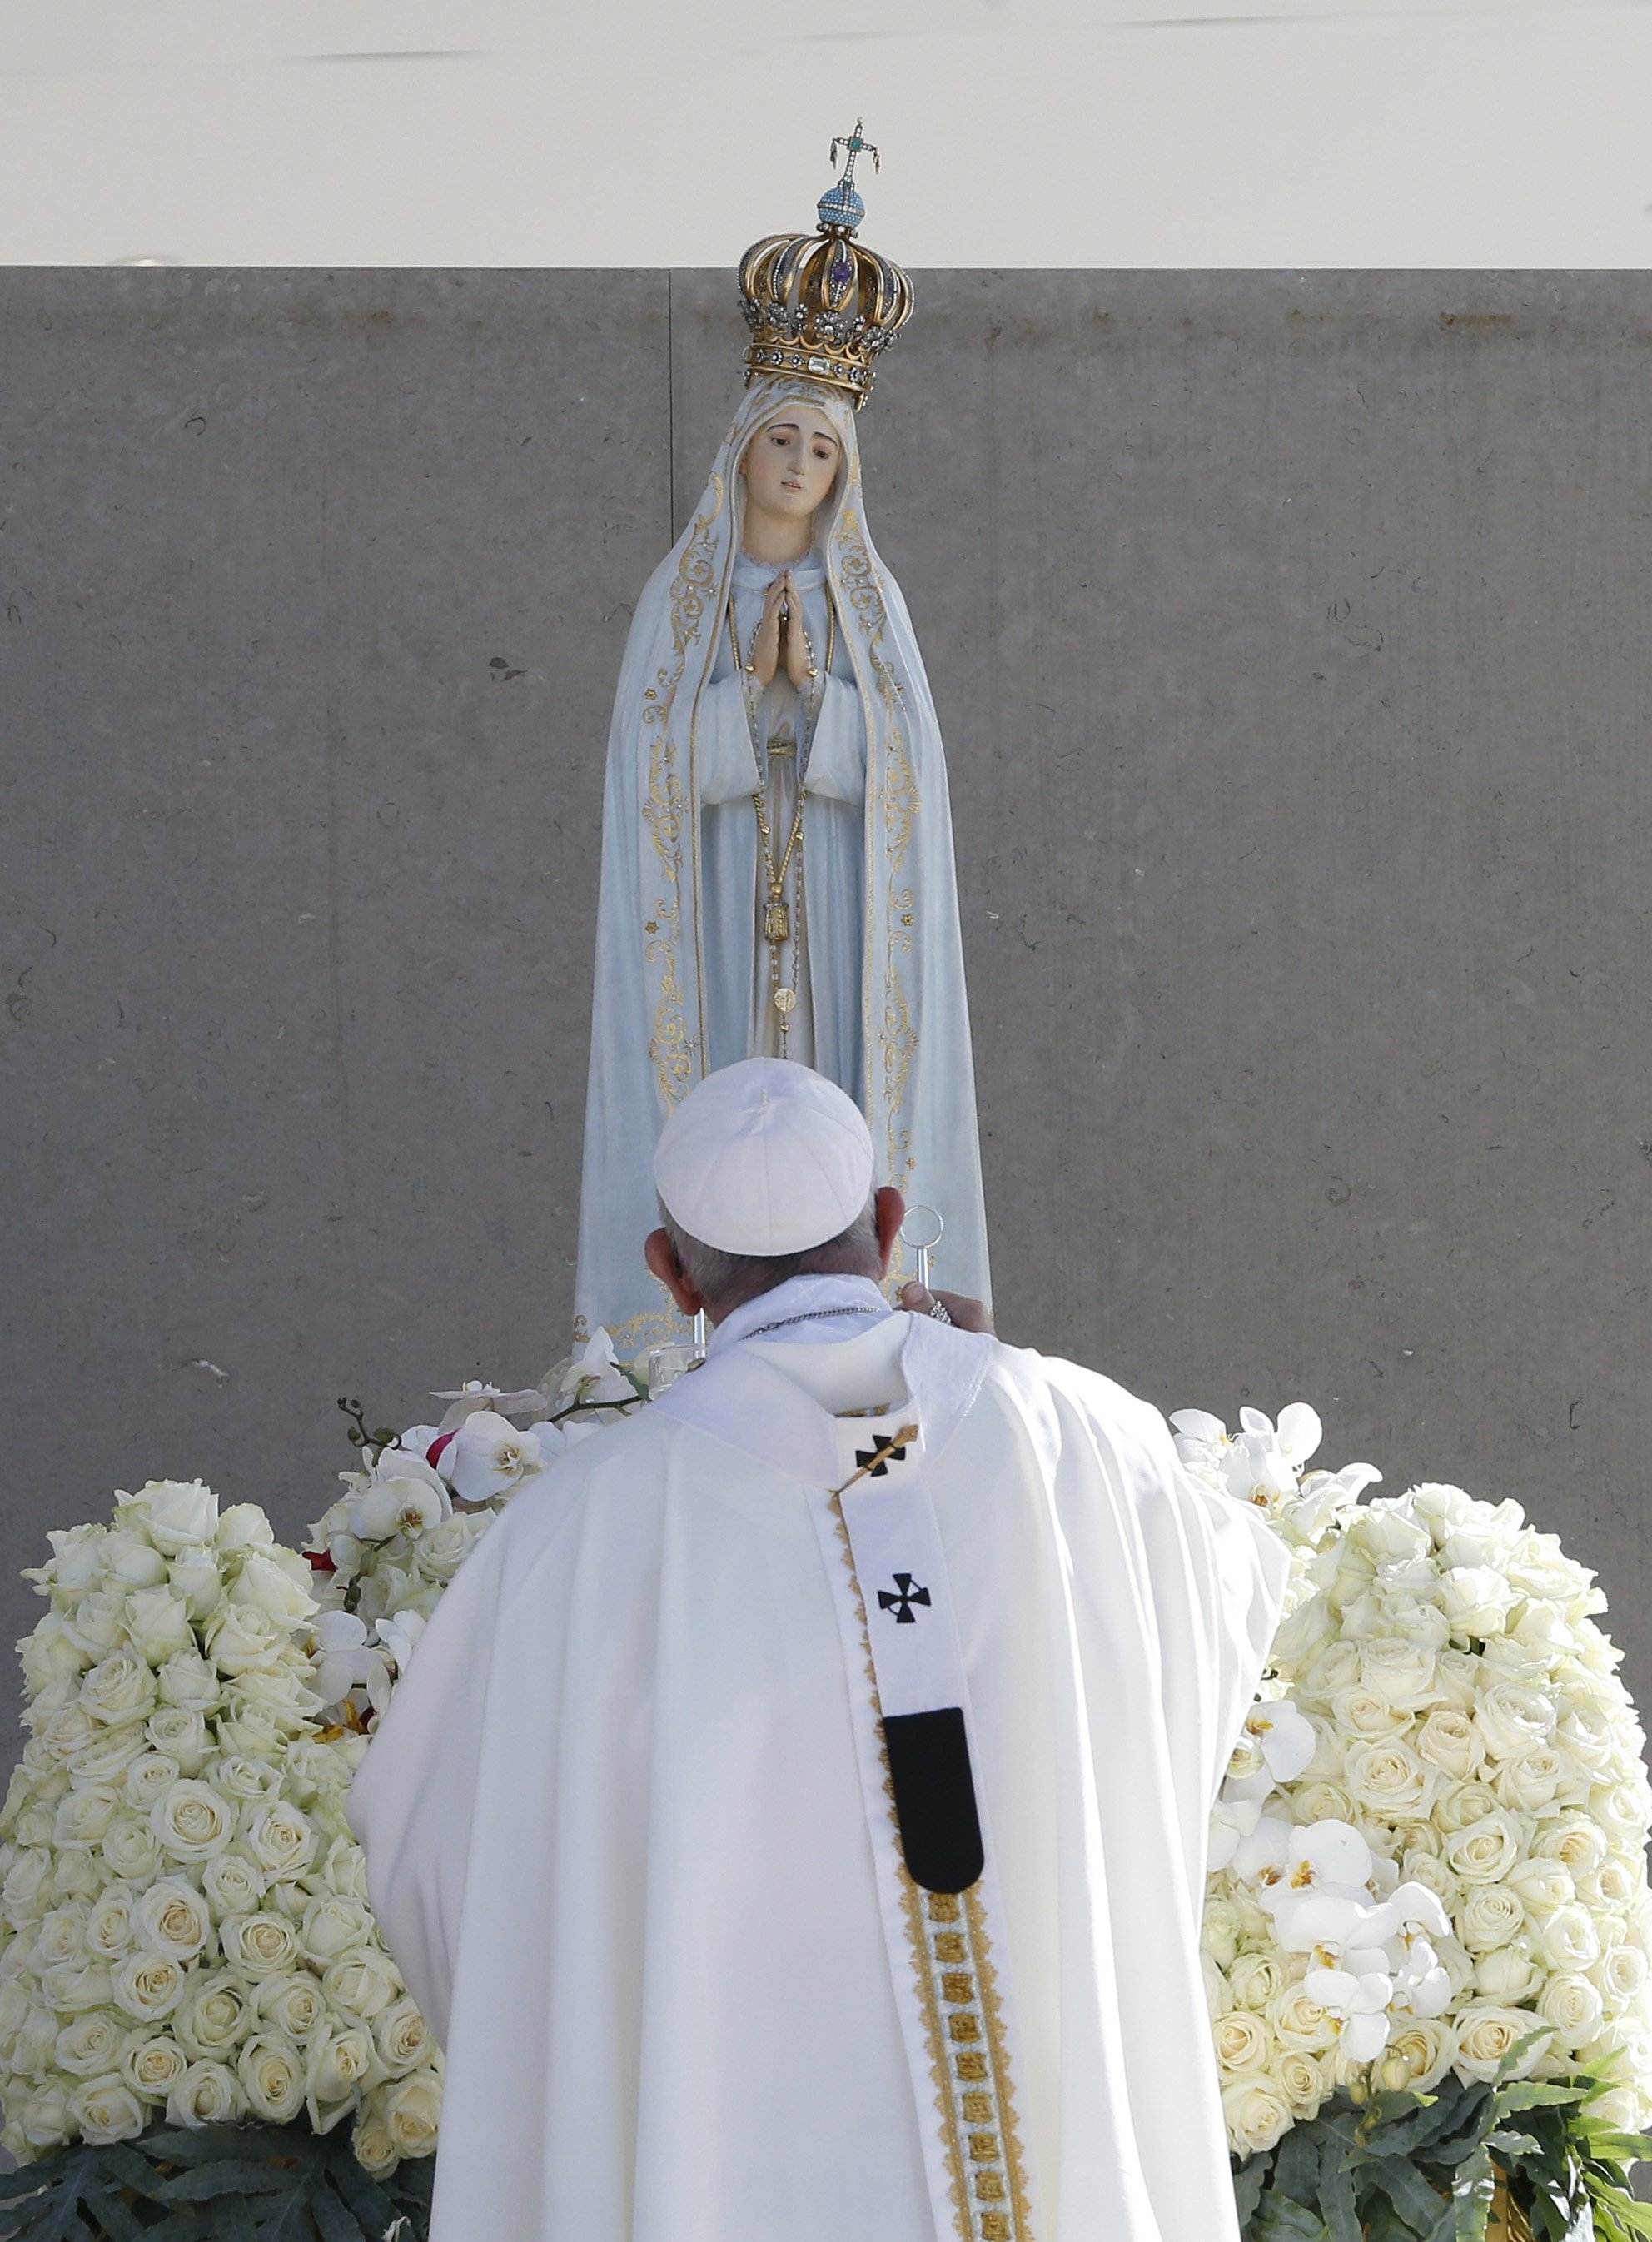 Pope Francis uses incense to venerate a statue of Our Lady of Fatima.